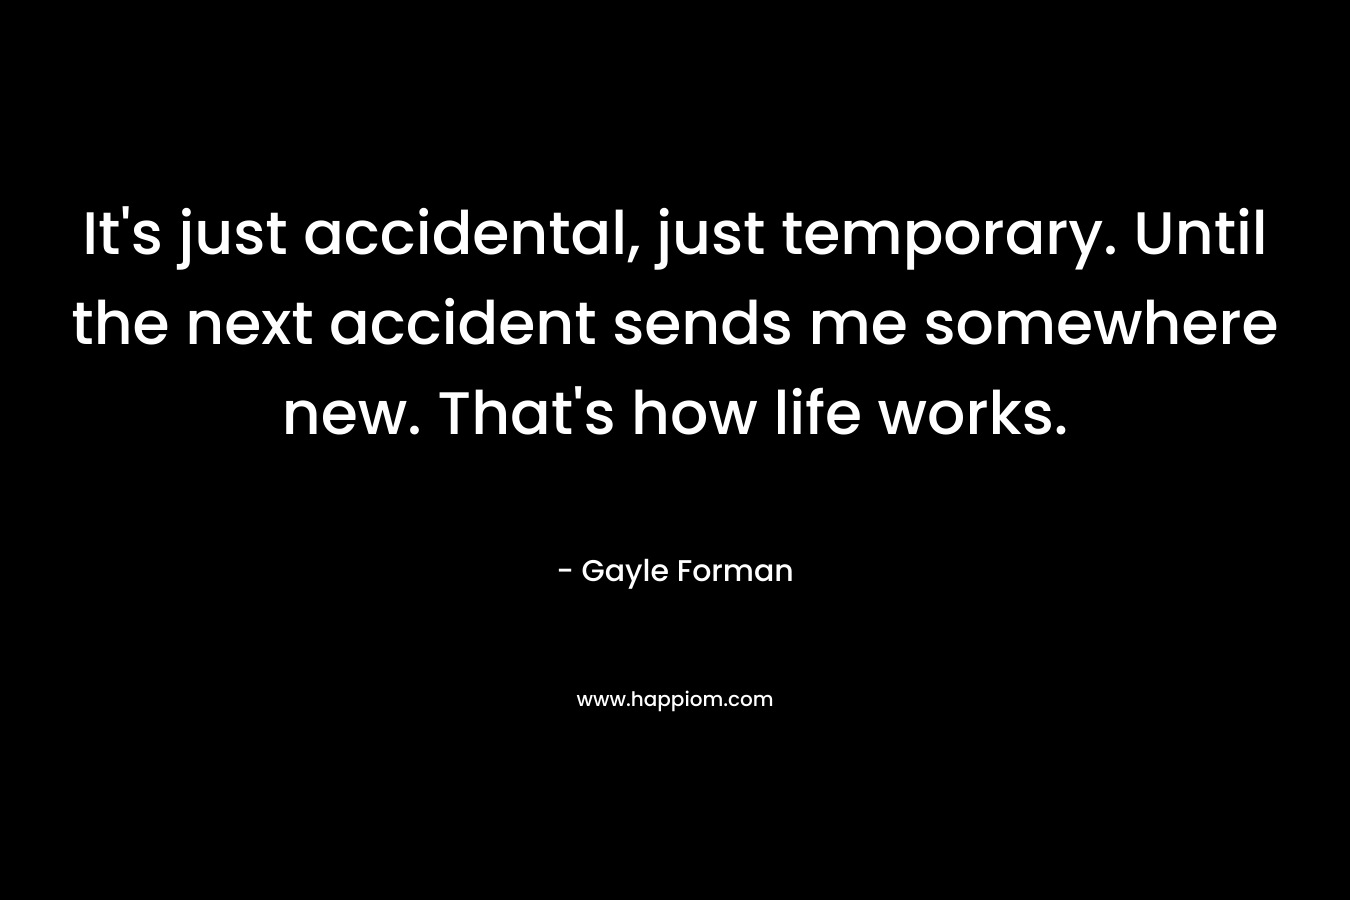 It's just accidental, just temporary. Until the next accident sends me somewhere new. That's how life works.